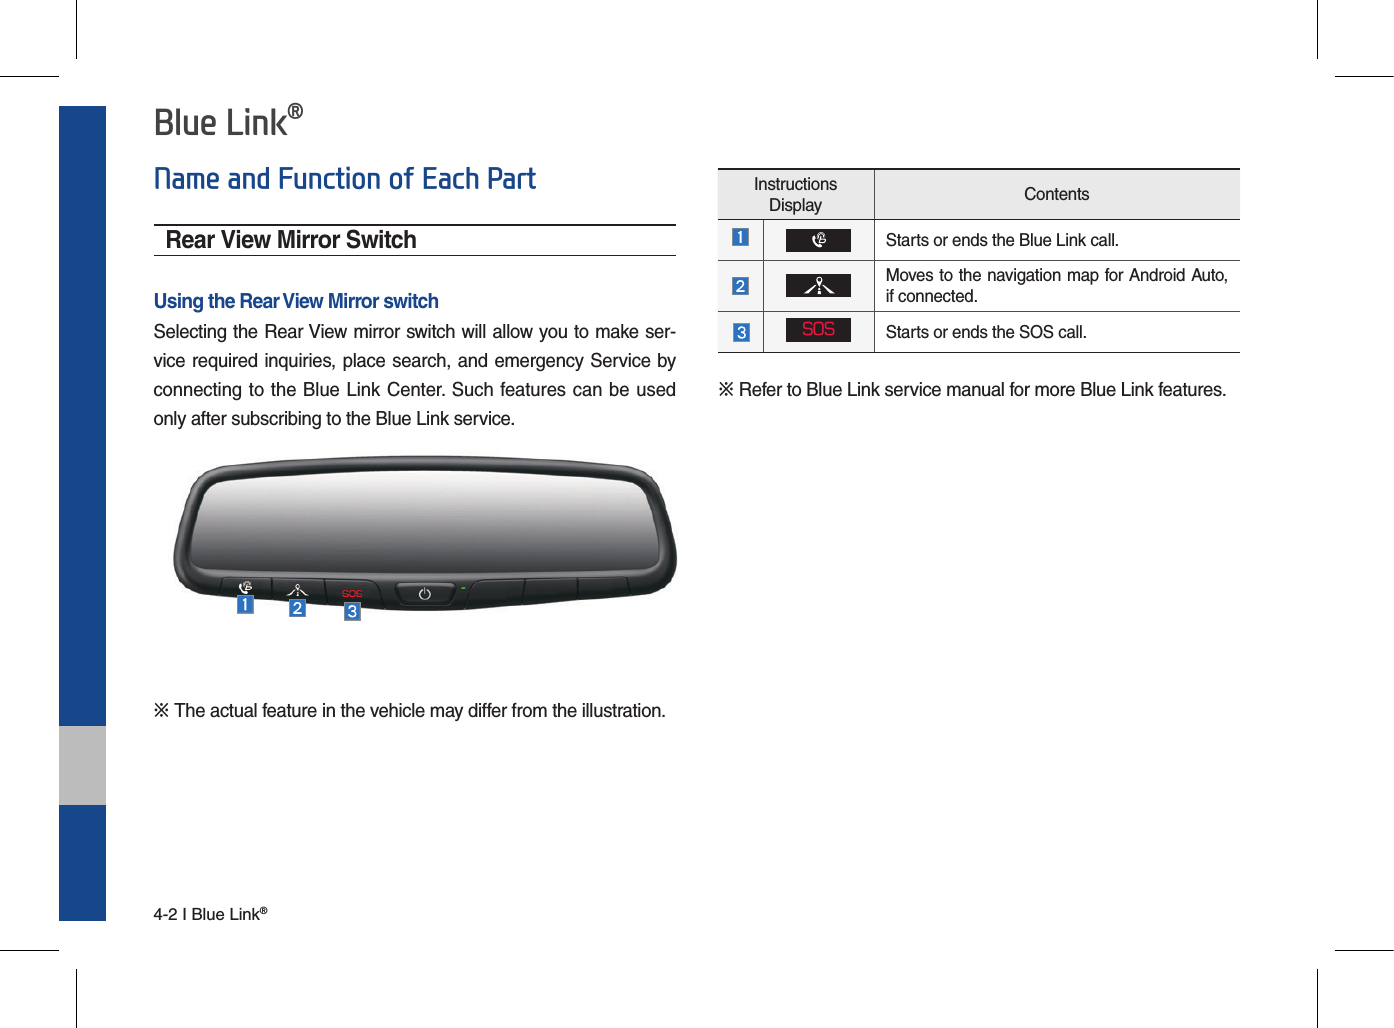 4-2 I Blue Link® Blue Link®Rear View Mirror SwitchUsing the Rear View Mirror switchSelecting the Rear View mirror switch will allow you to make ser-vice required inquiries, place search, and emergency Service by connecting to the Blue Link Center. Such features can be used only after subscribing to the Blue Link service.※ The actual feature in the vehicle may differ from the illustration.Instructions Display ContentsStarts or ends the Blue Link call.Moves to the navigation map for Android Auto, if connected.SOSStarts or ends the SOS call.Name and Function of Each Part※ Refer to Blue Link service manual for more Blue Link features.